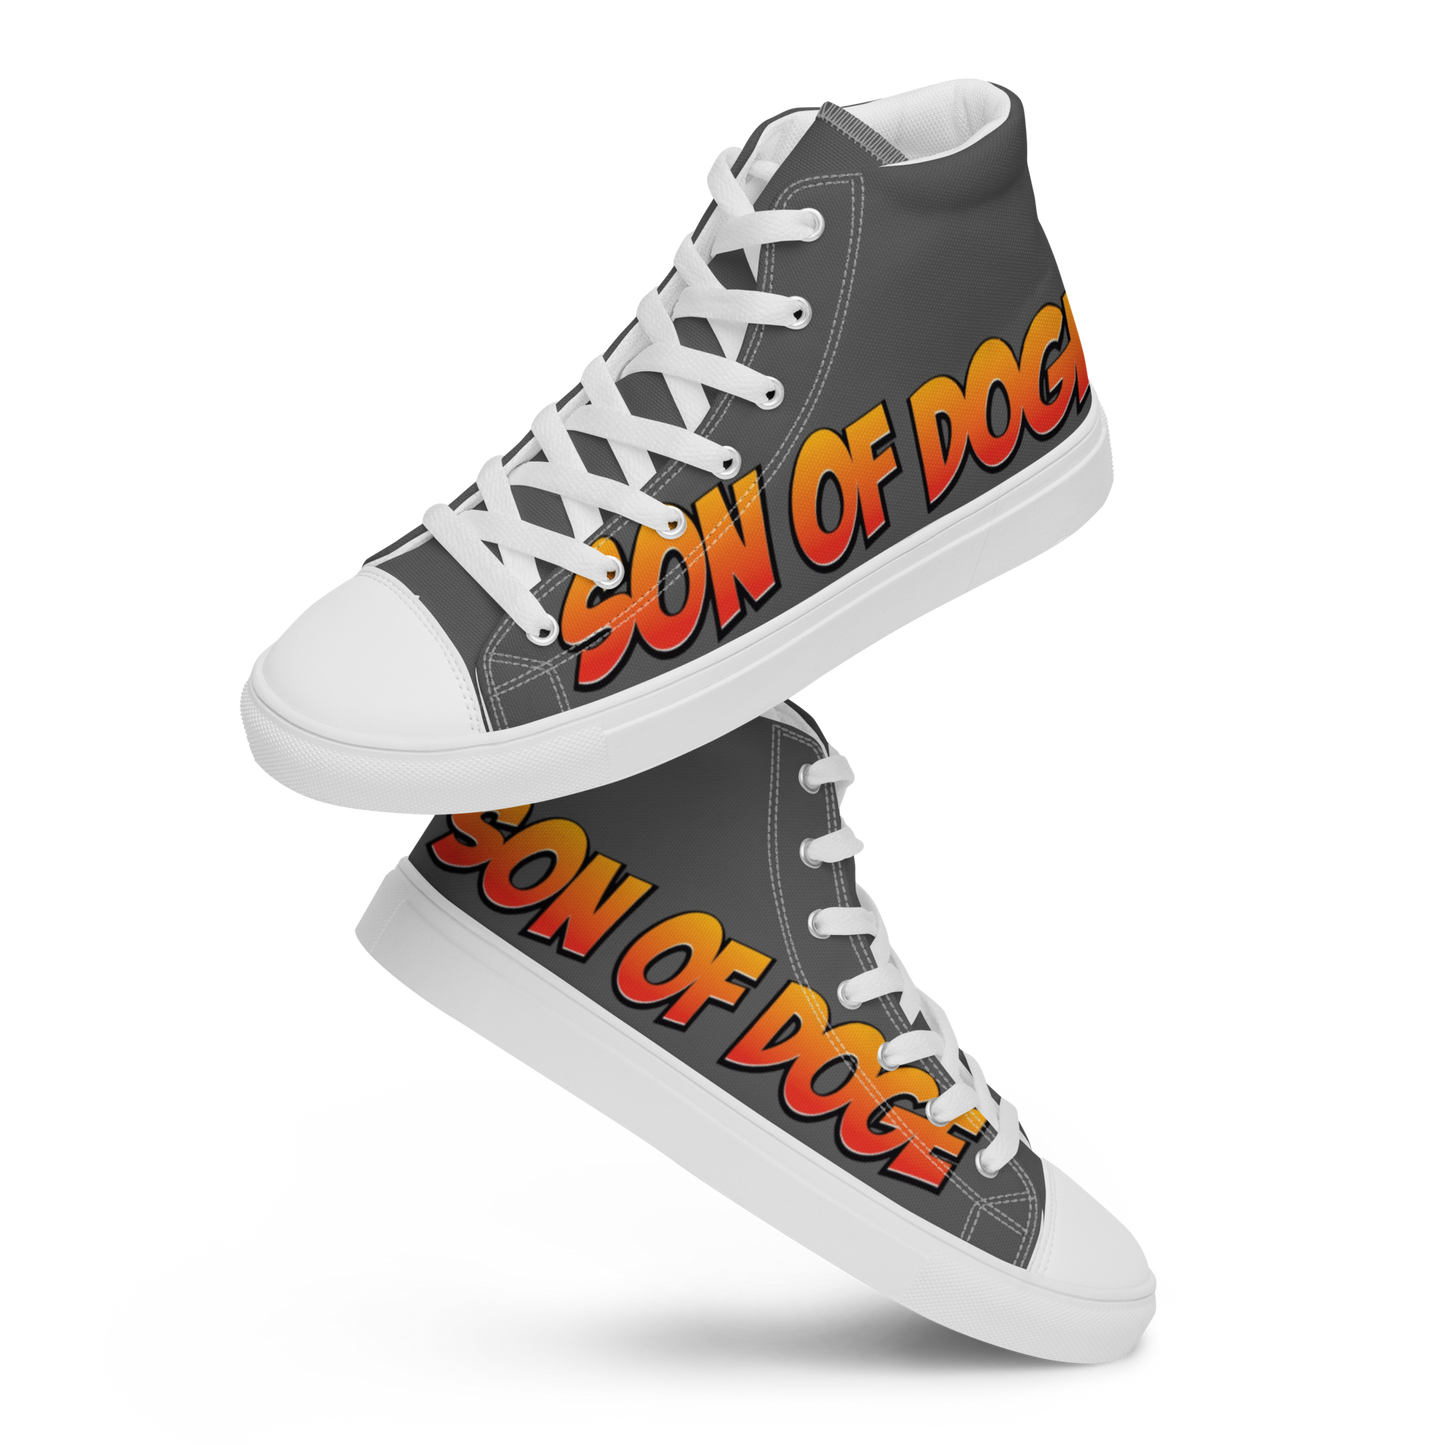 Son Of Doge - Women’s high top canvas shoes (Grey)